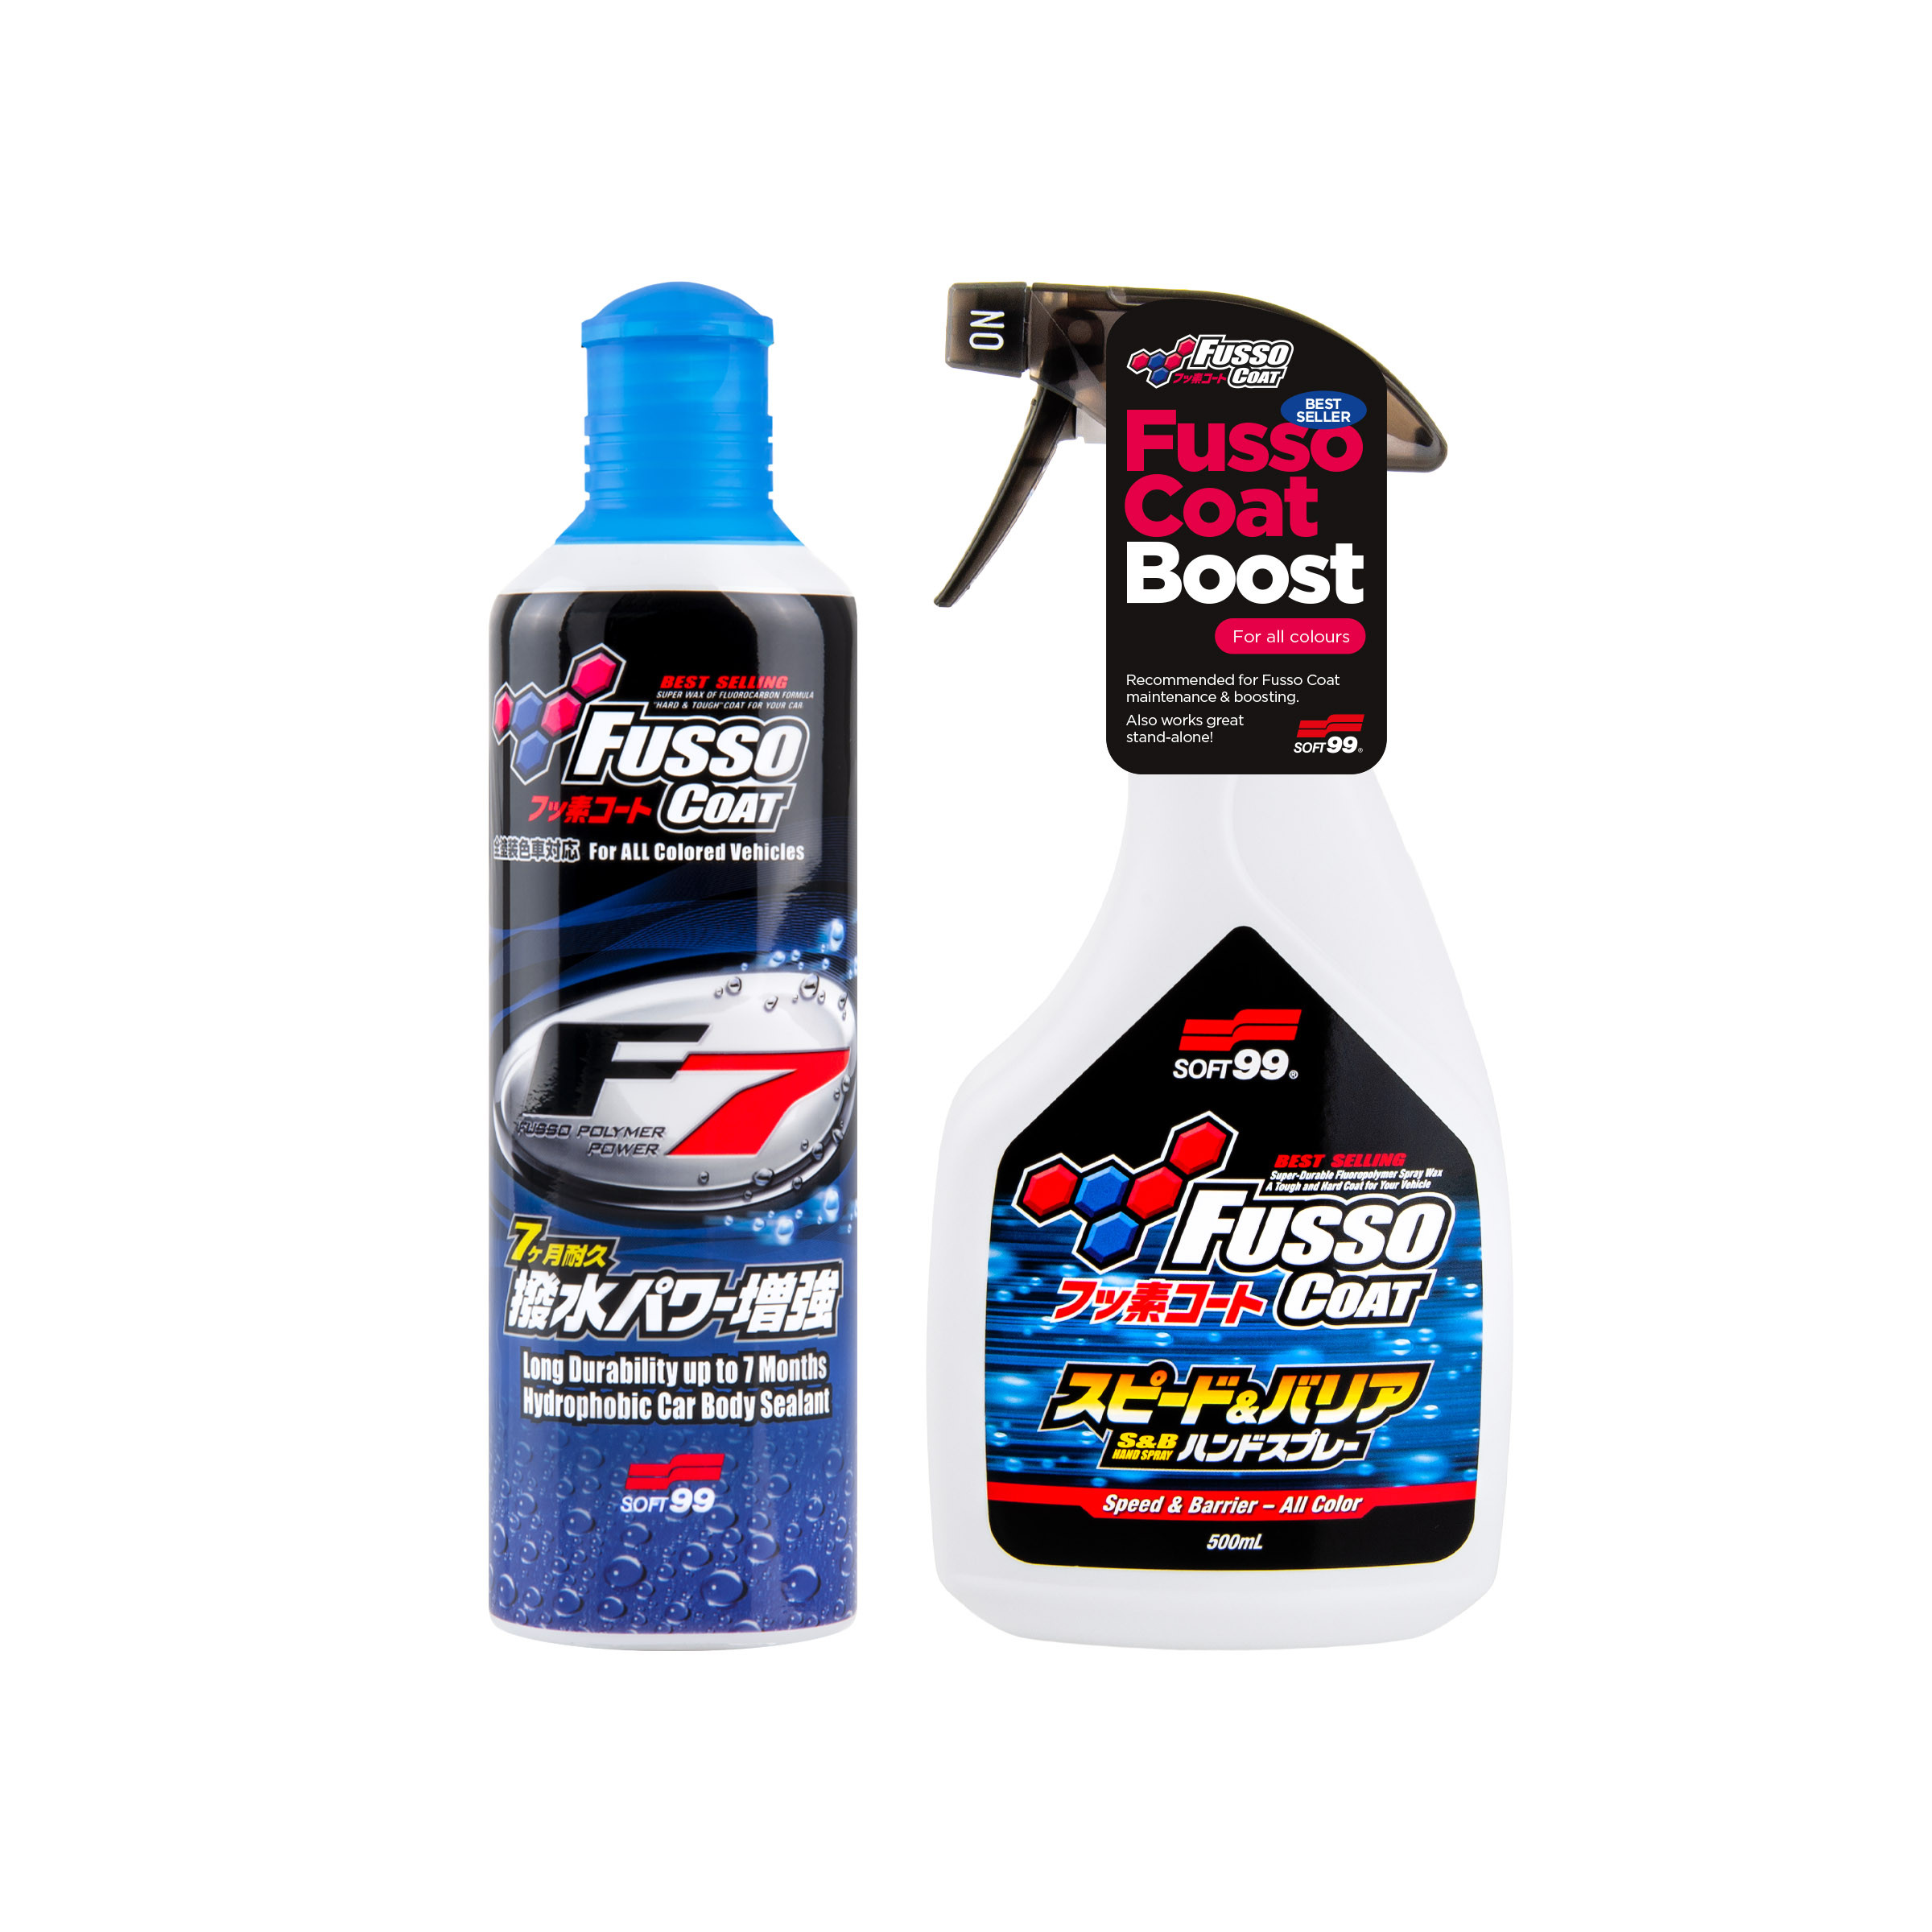 Fusso Coat F7 All Colours + Fusso Coat Speed & Barrier